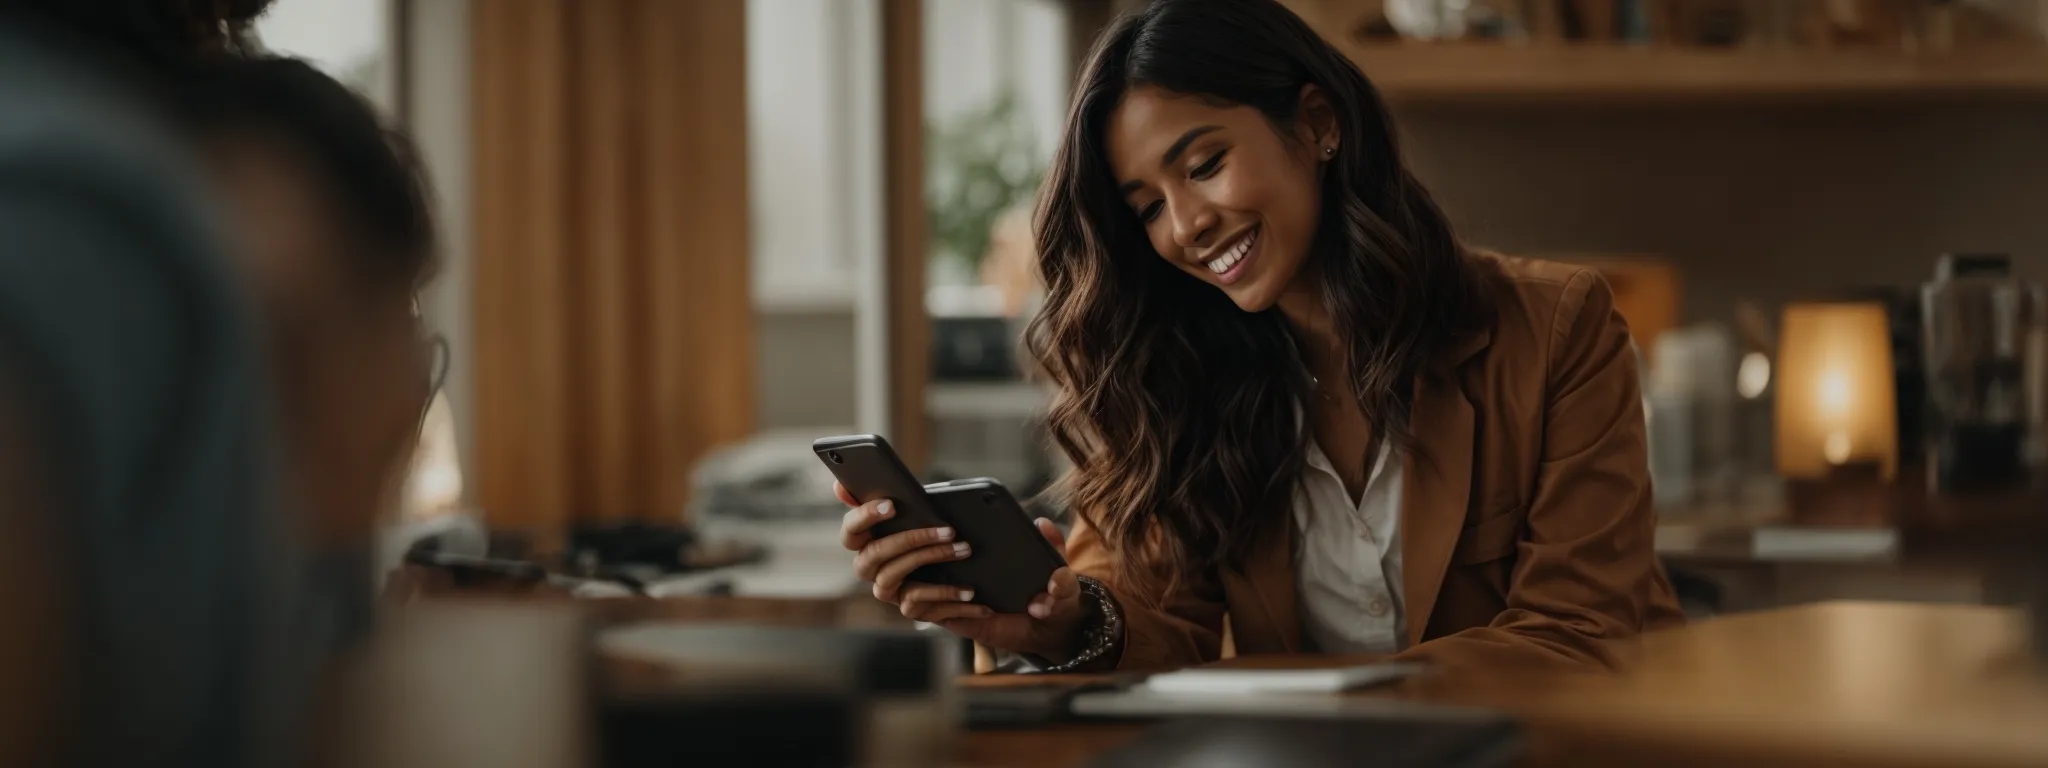 a user smiling with satisfaction while effortlessly browsing a fast-loading, mobile-friendly website on their smartphone.